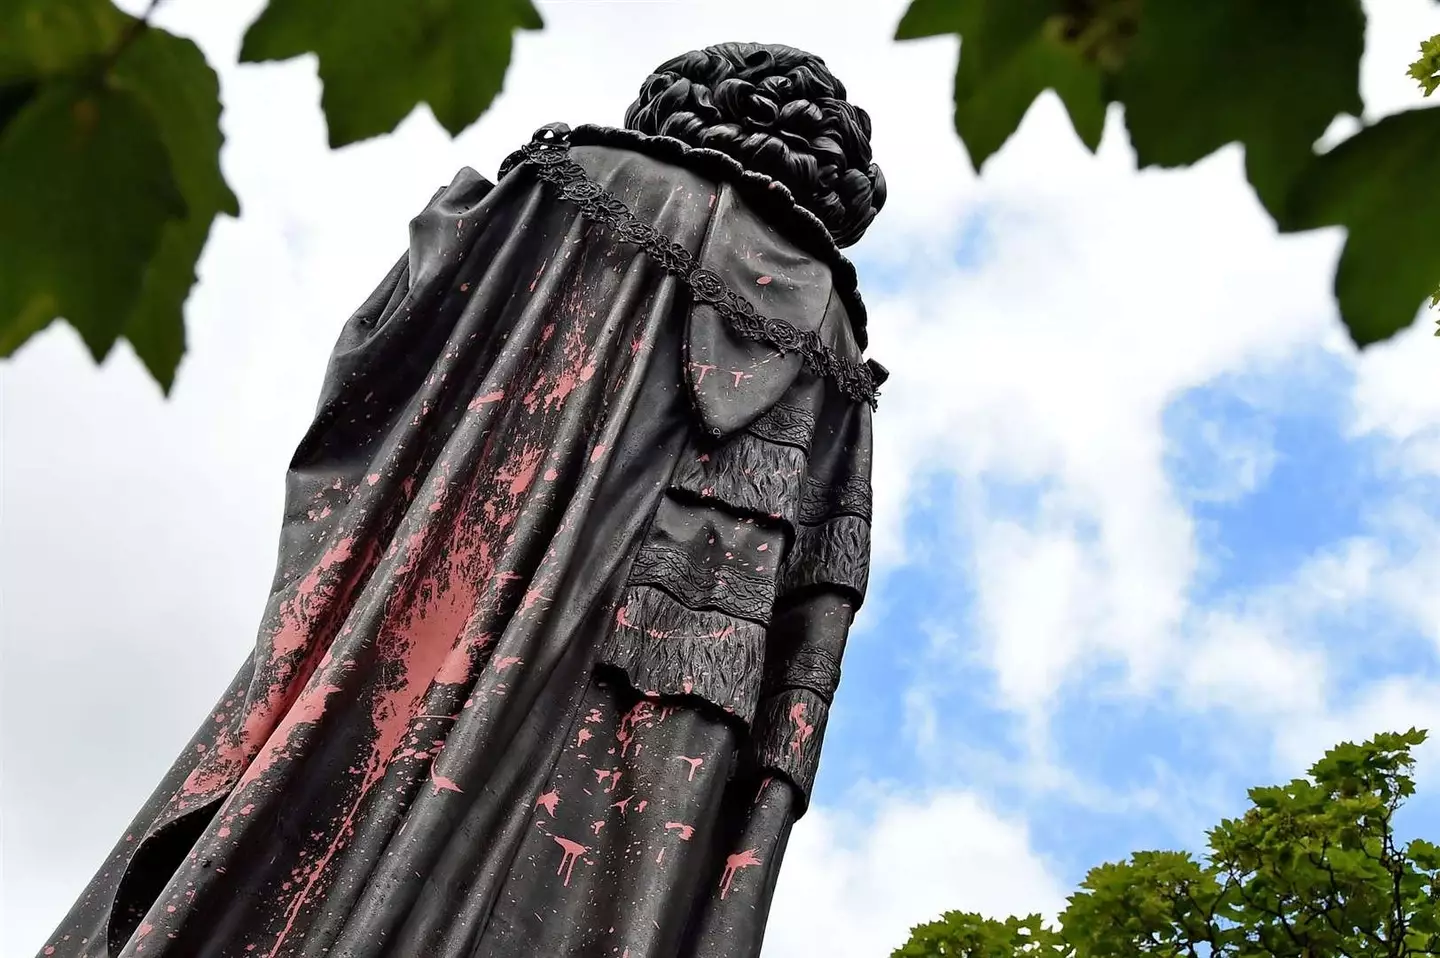 A £300,000 statue of Margaret Thatcher has had red paint thrown on it.